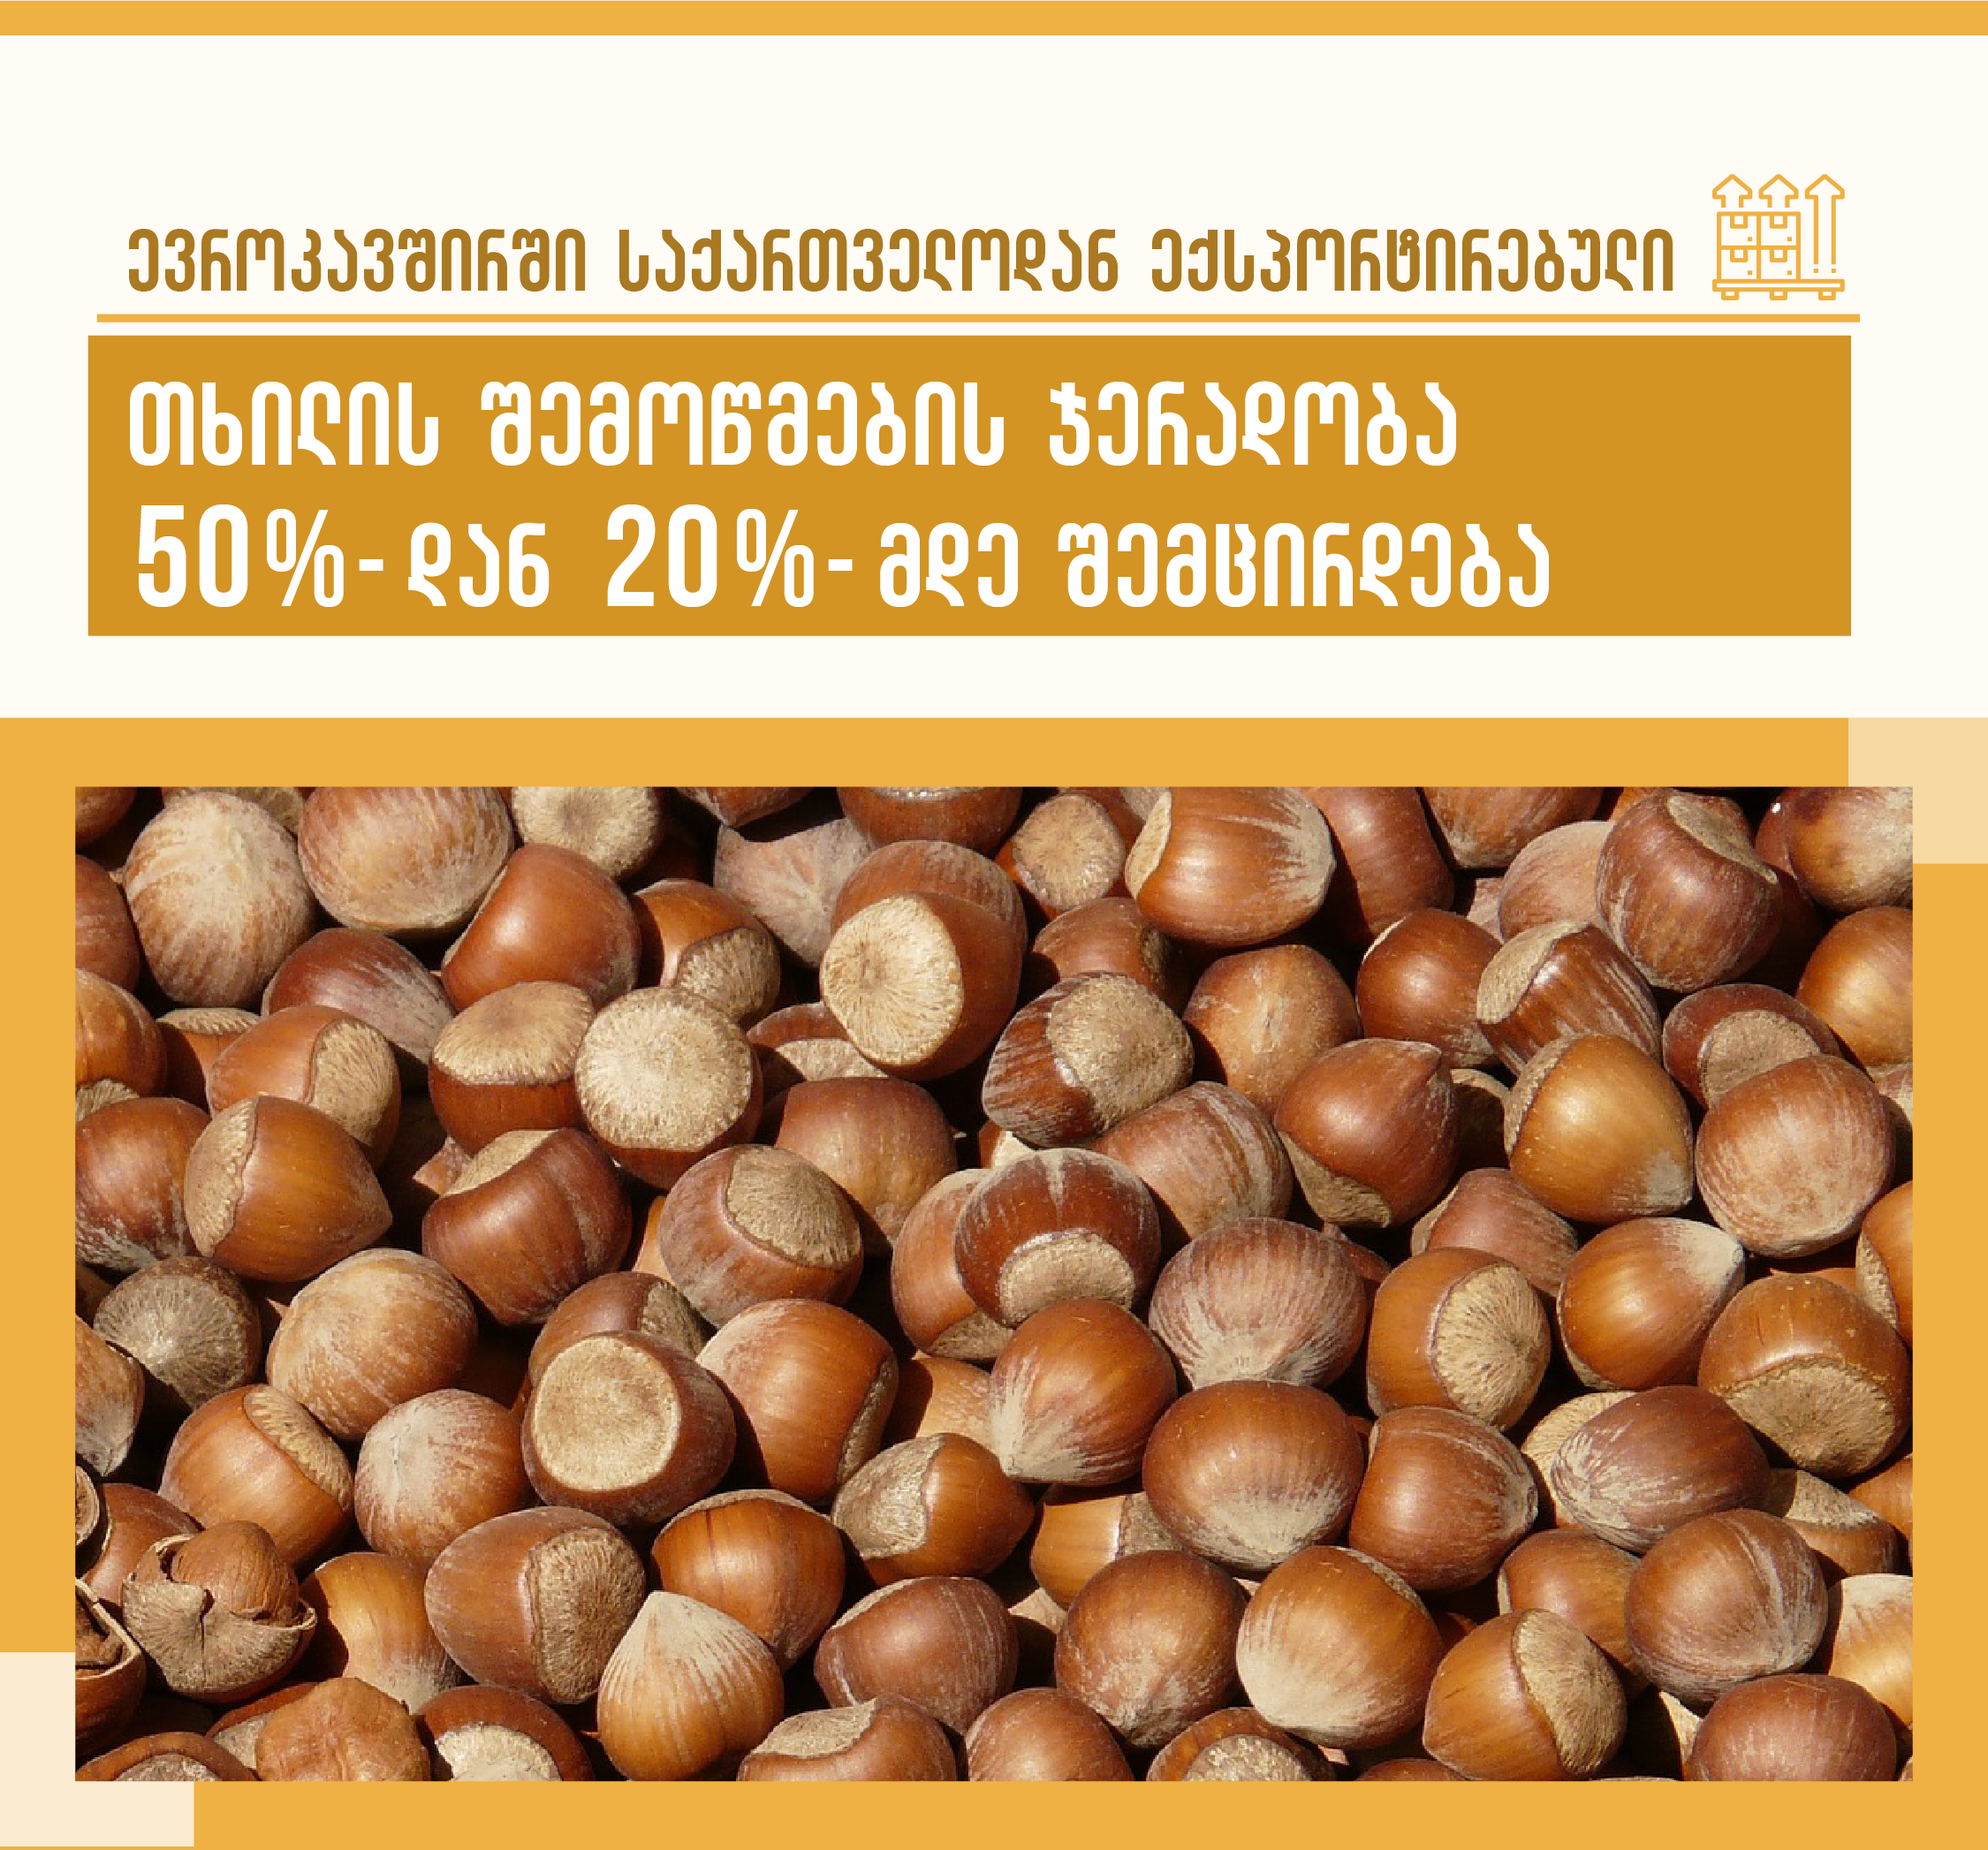 The frequency of inspection of hazelnuts exported from Georgia to the EU will be reduced from 50% to 20%